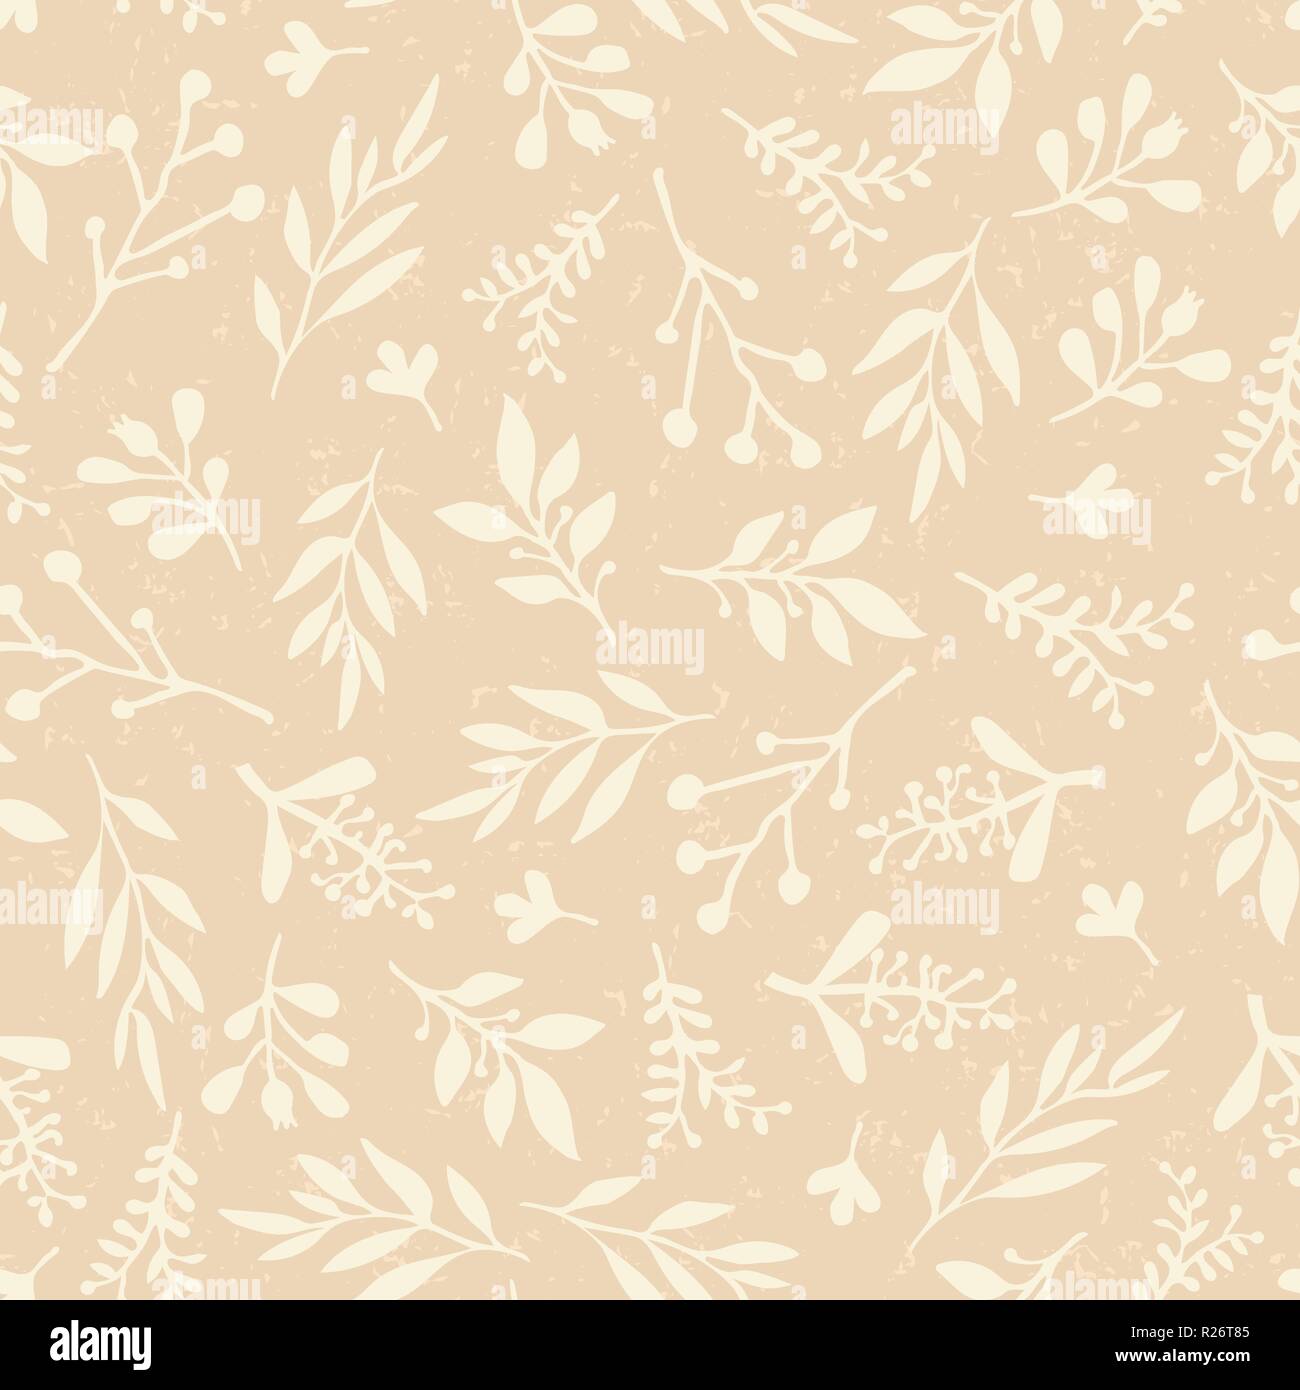 Seamless vector background with abstract leaves beige. Simple leaf texture in pastell, endless foliage pattern. Distressed vintage retro style.Paper, pattern fills, web banner, fabric, cards, wedding Stock Vector